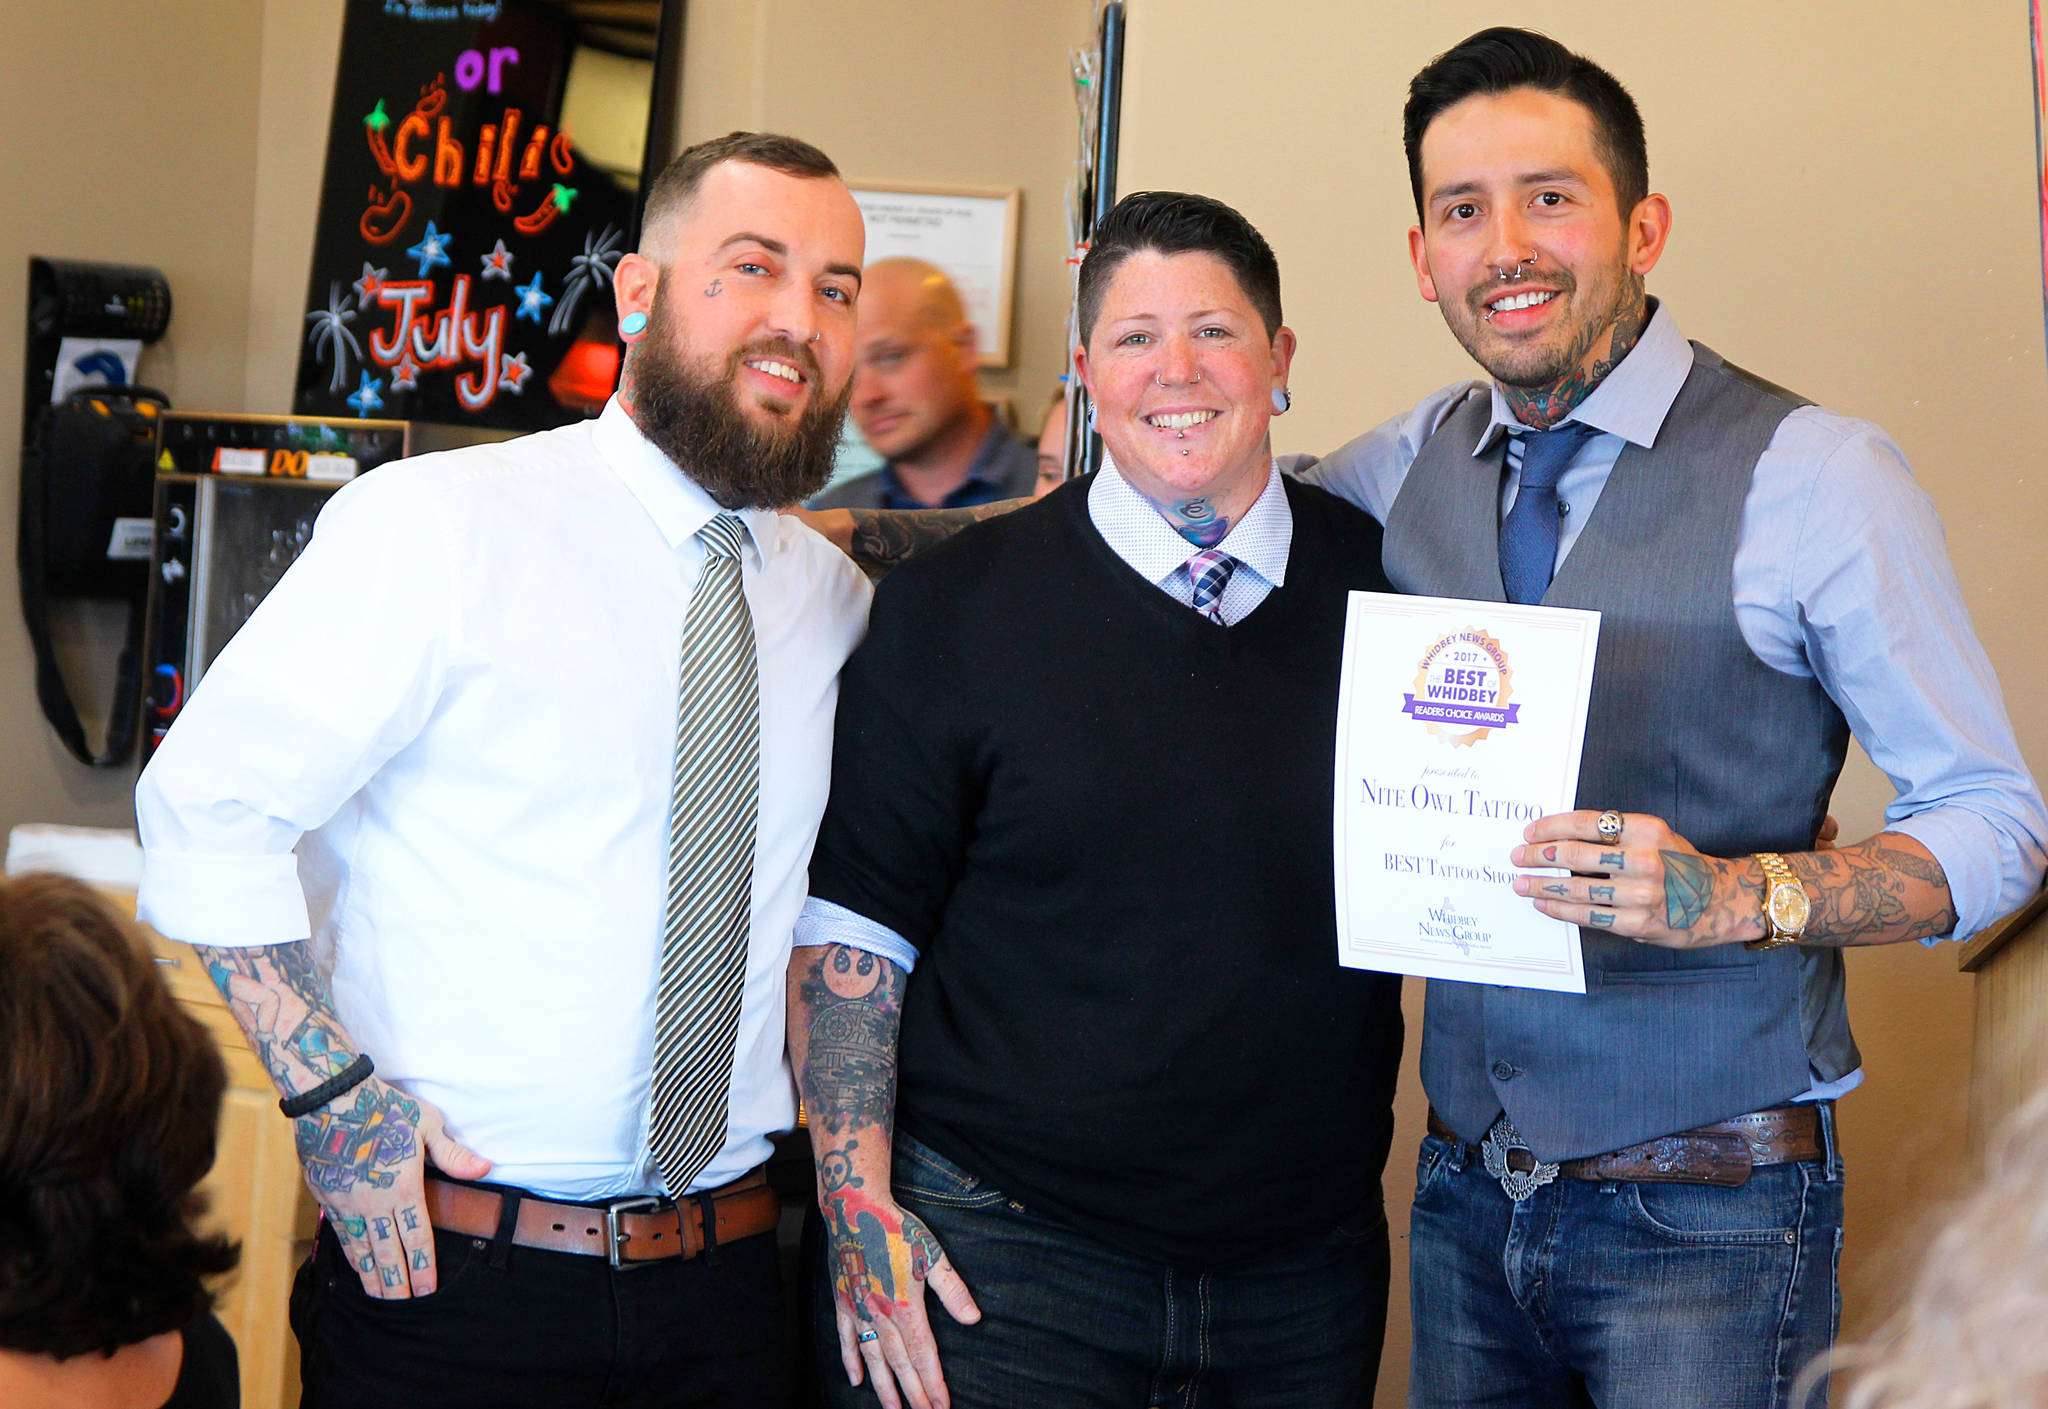 Seth Smith, Molly Vigallon and William Lloyd of Nite Owl Tattoo accept an award for Best Tattoo Shop. Photo by Megan Hansen/Whidbey News-Times